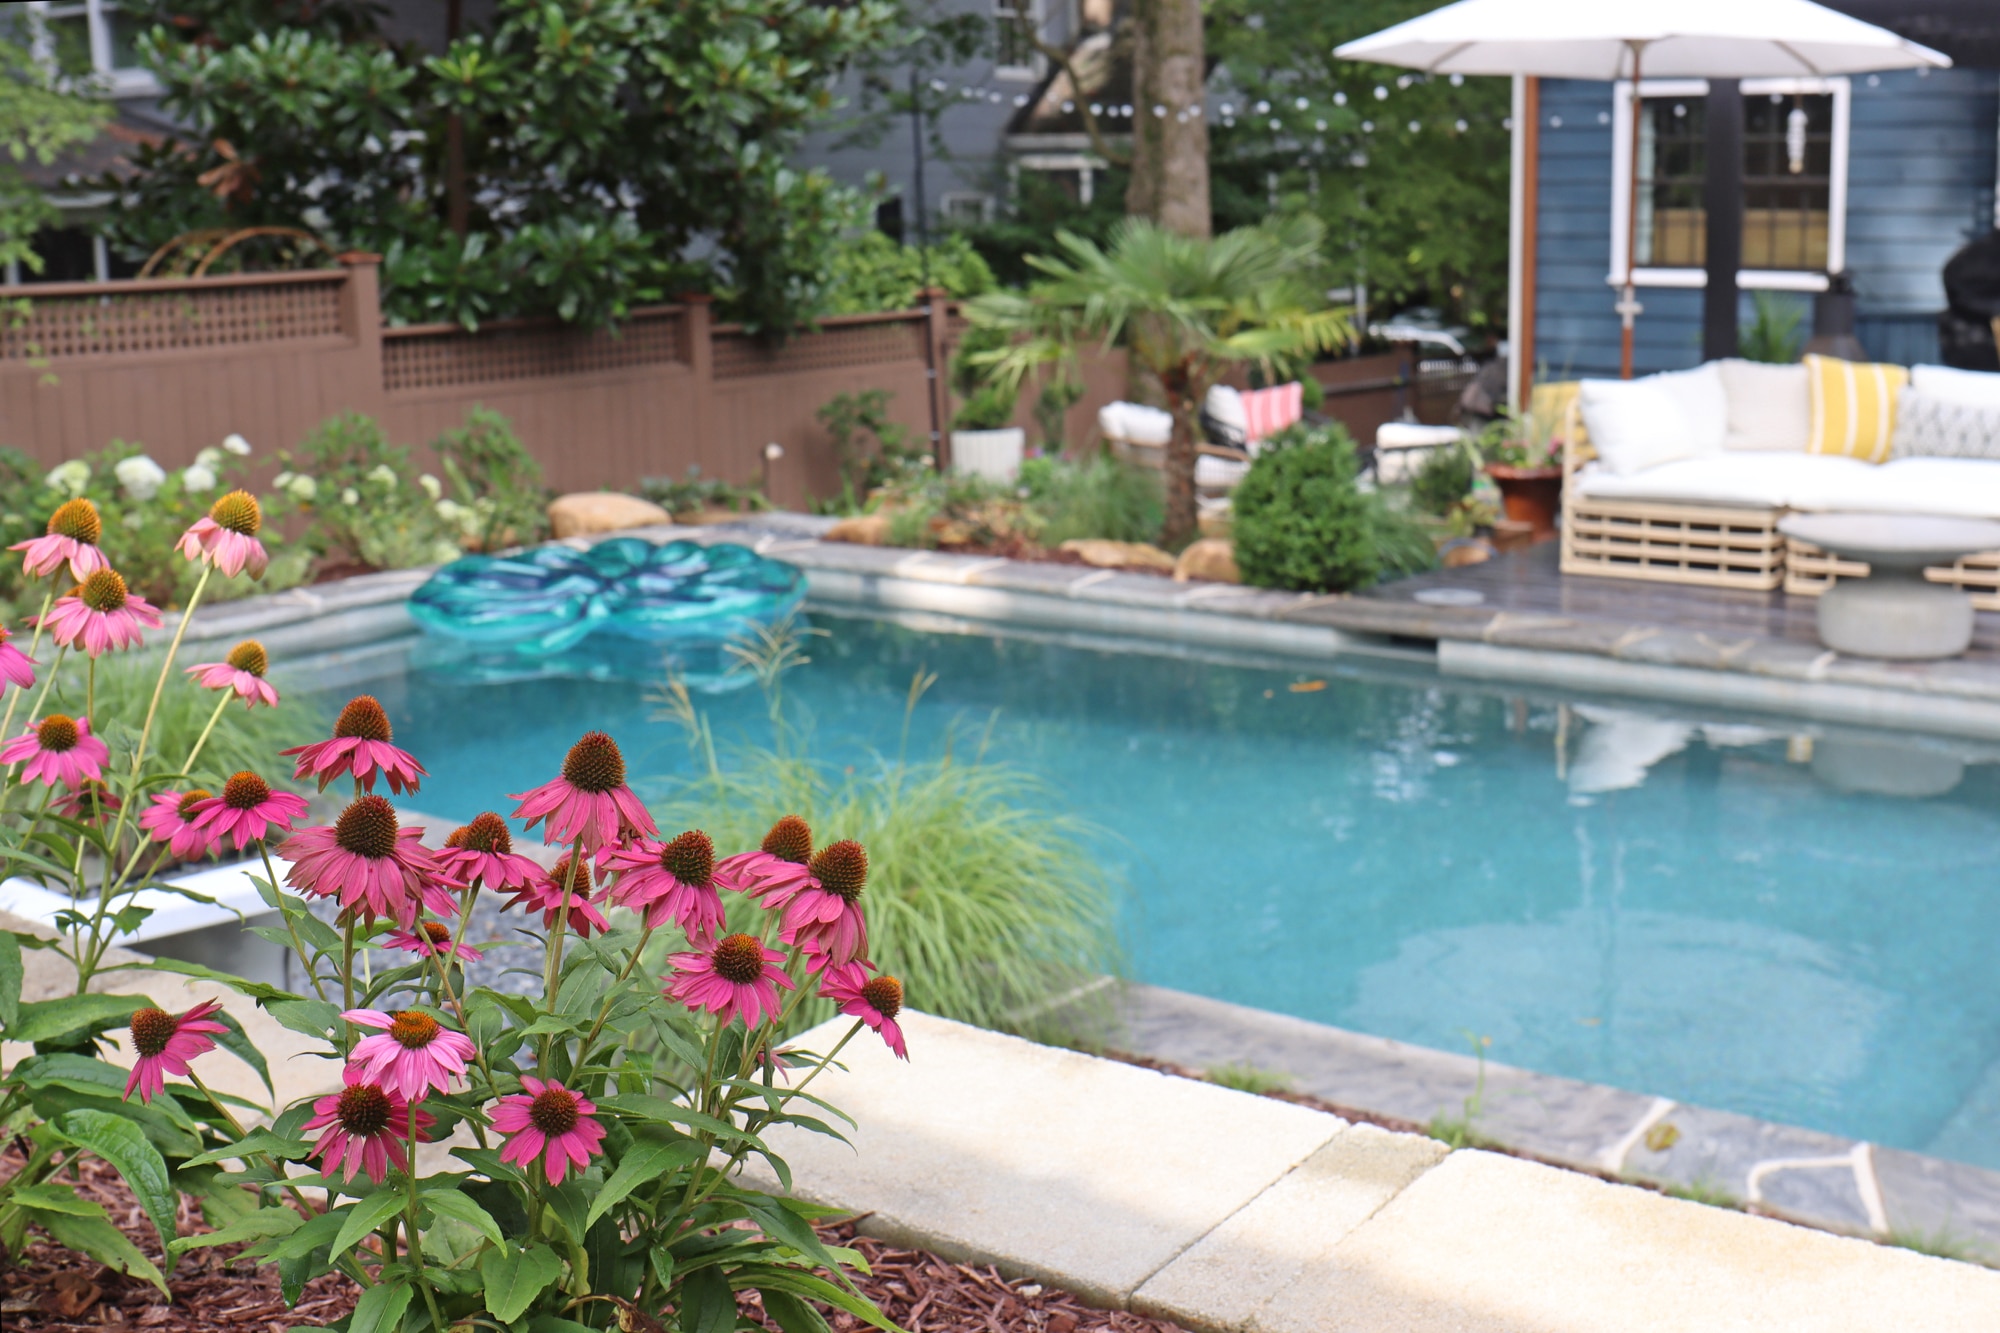 Backyard pool with low-maintenance plants, outdoor seating